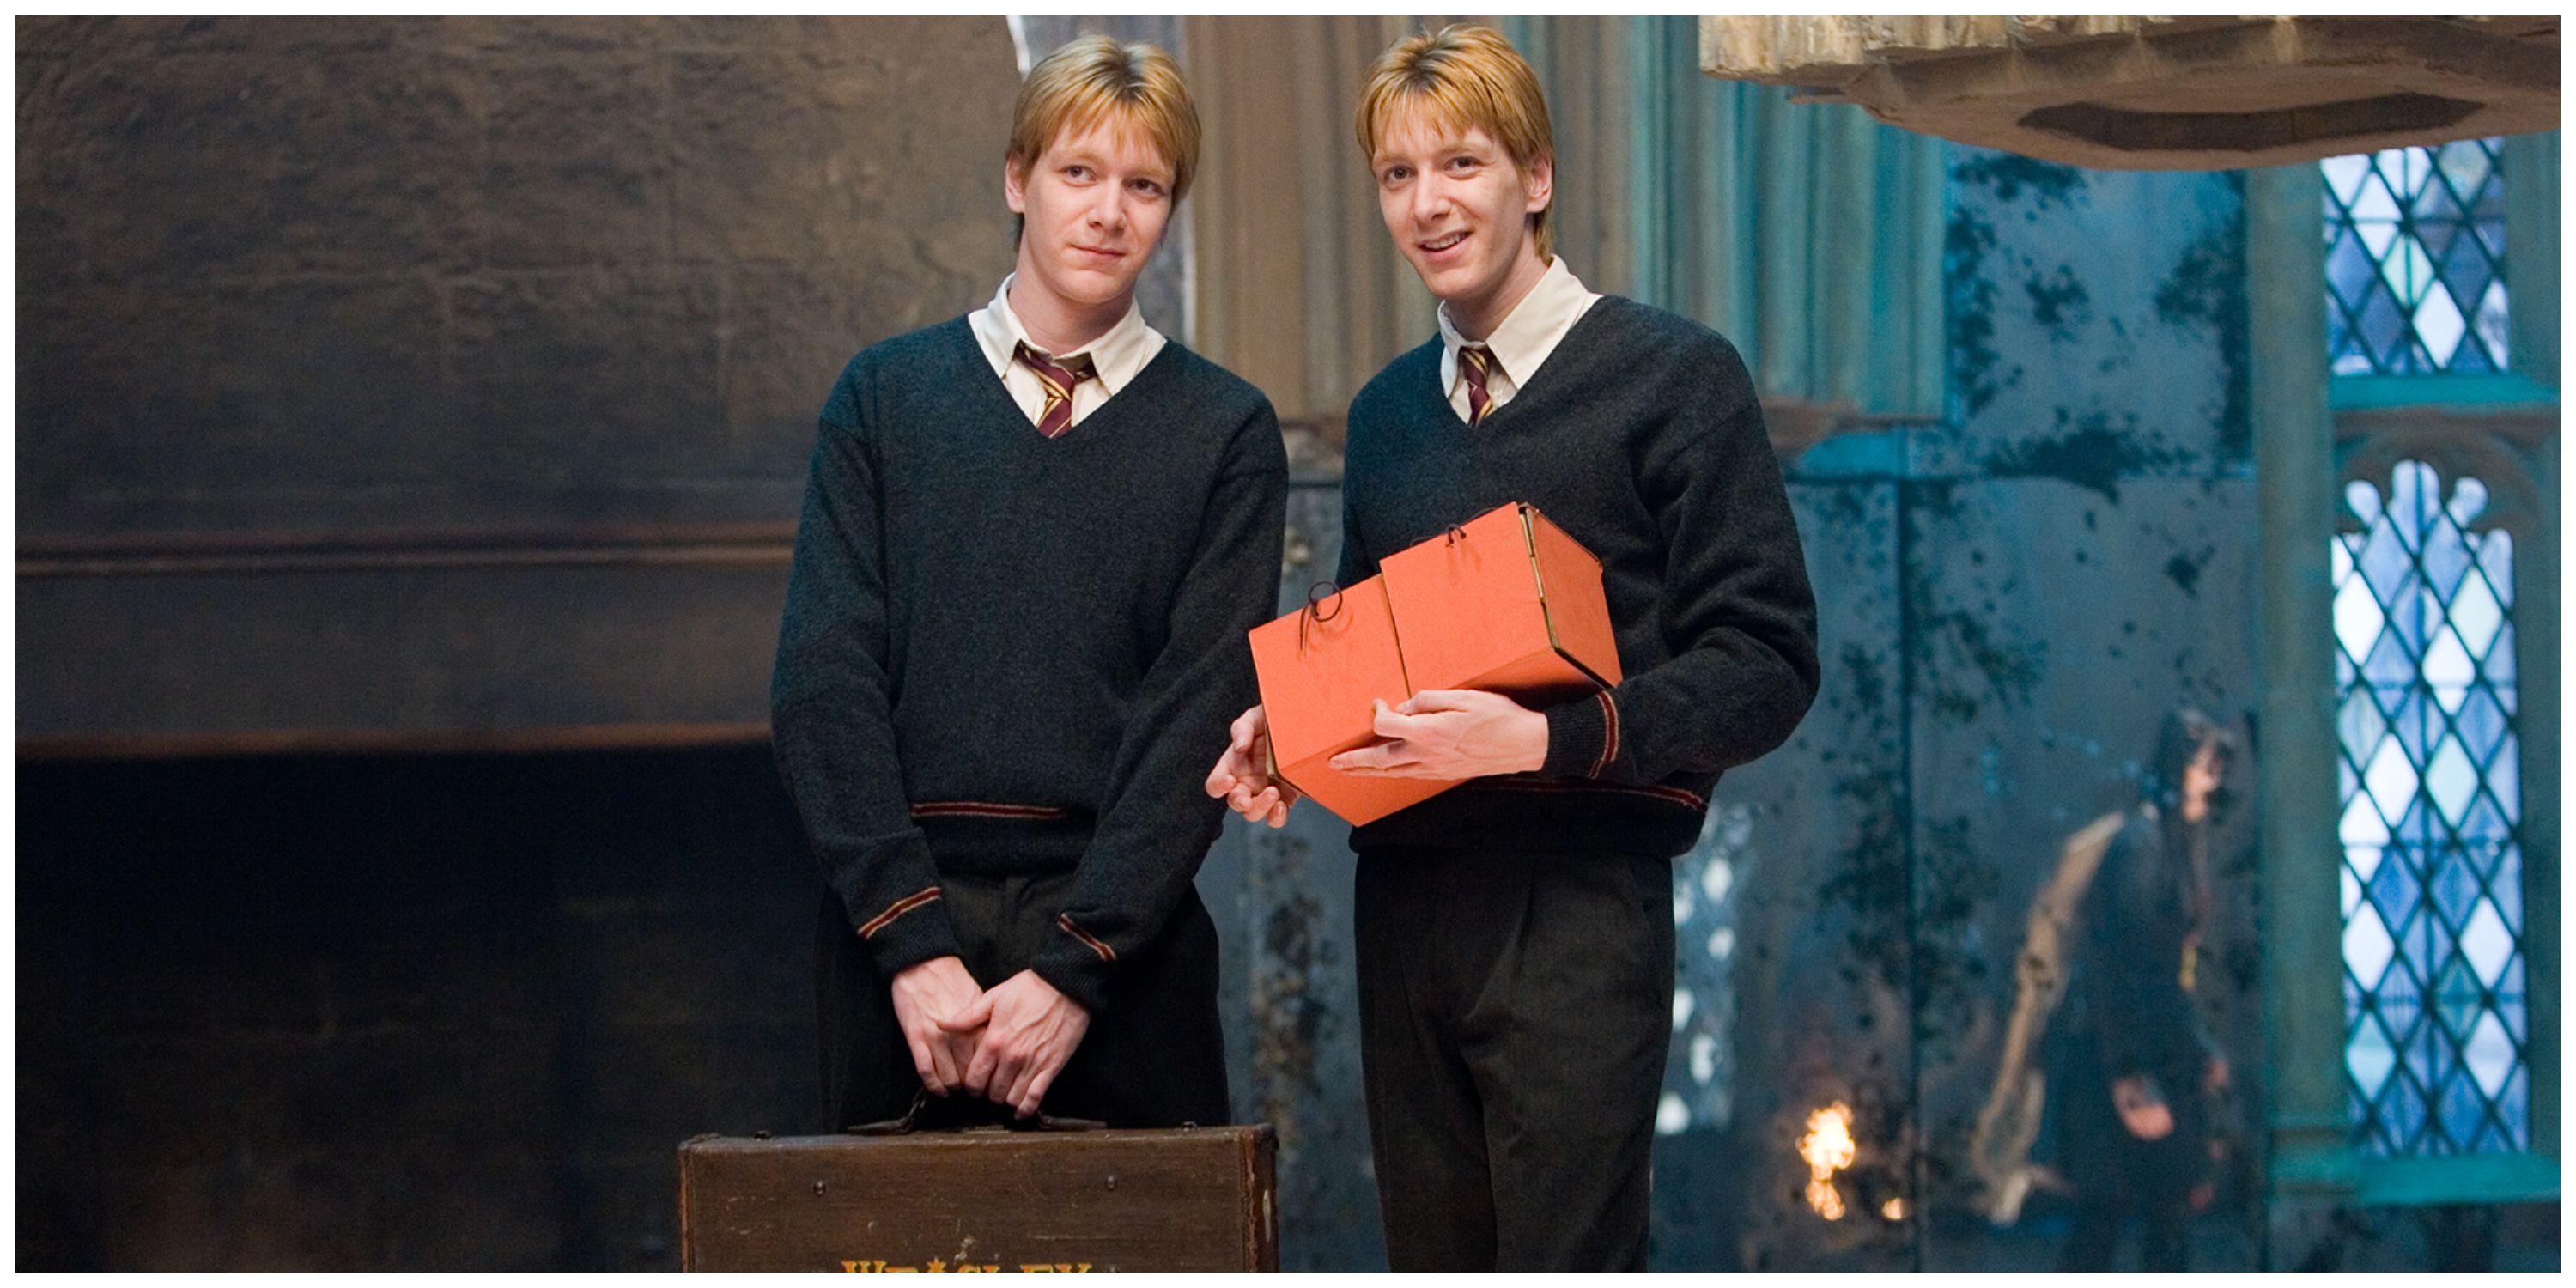 Fred and George Weasley in Harry Potter and the Order of the Phoenix